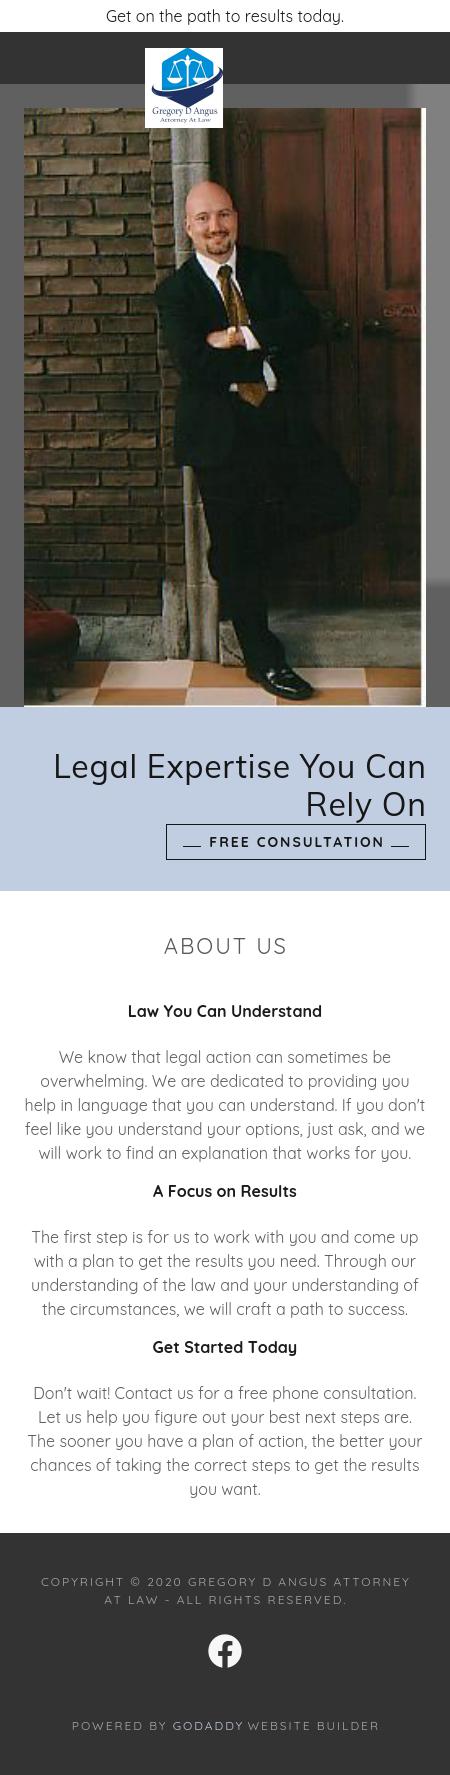 Angus Greg Attorney At Law - Riverside CA Lawyers